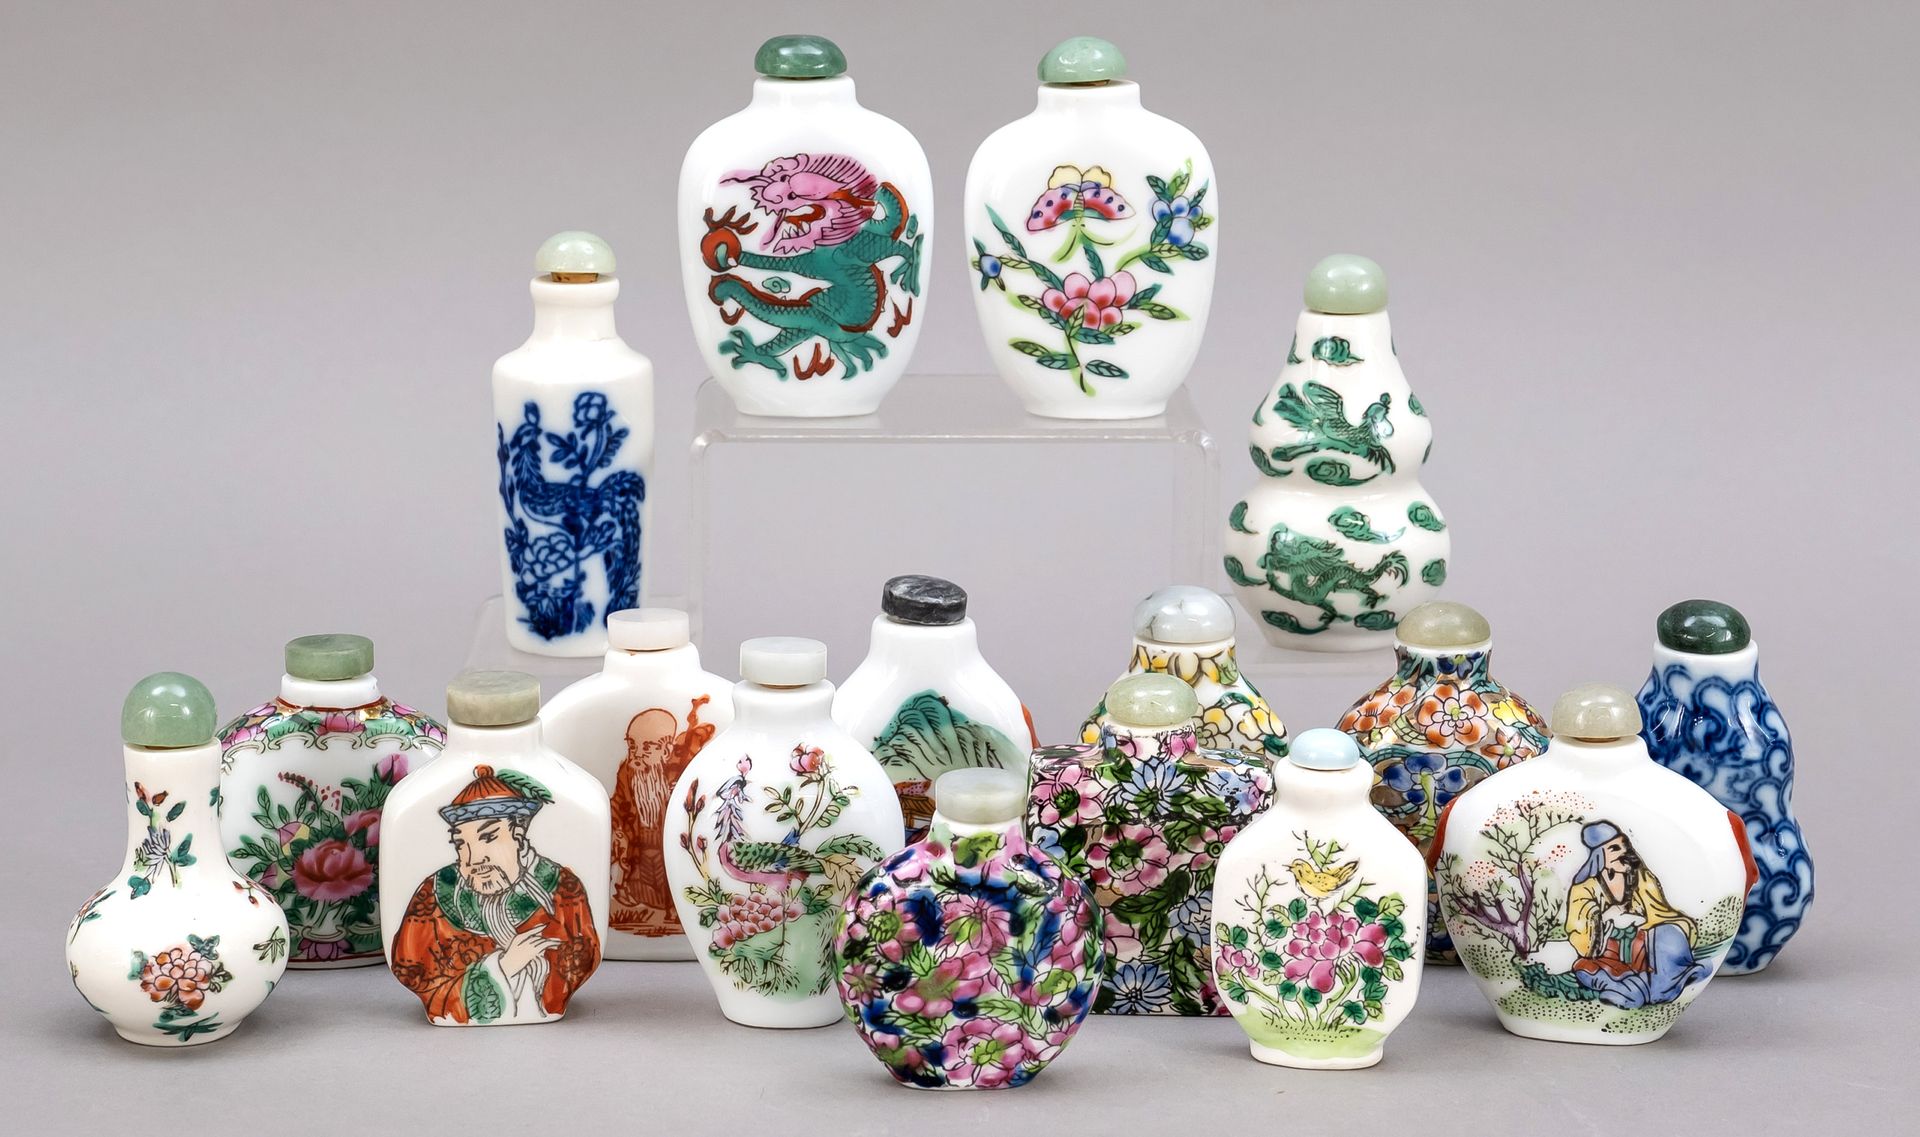 Null Mixed lot of 15 snuffbottles, China, 19th/20th c., all made of porcelain wi&hellip;